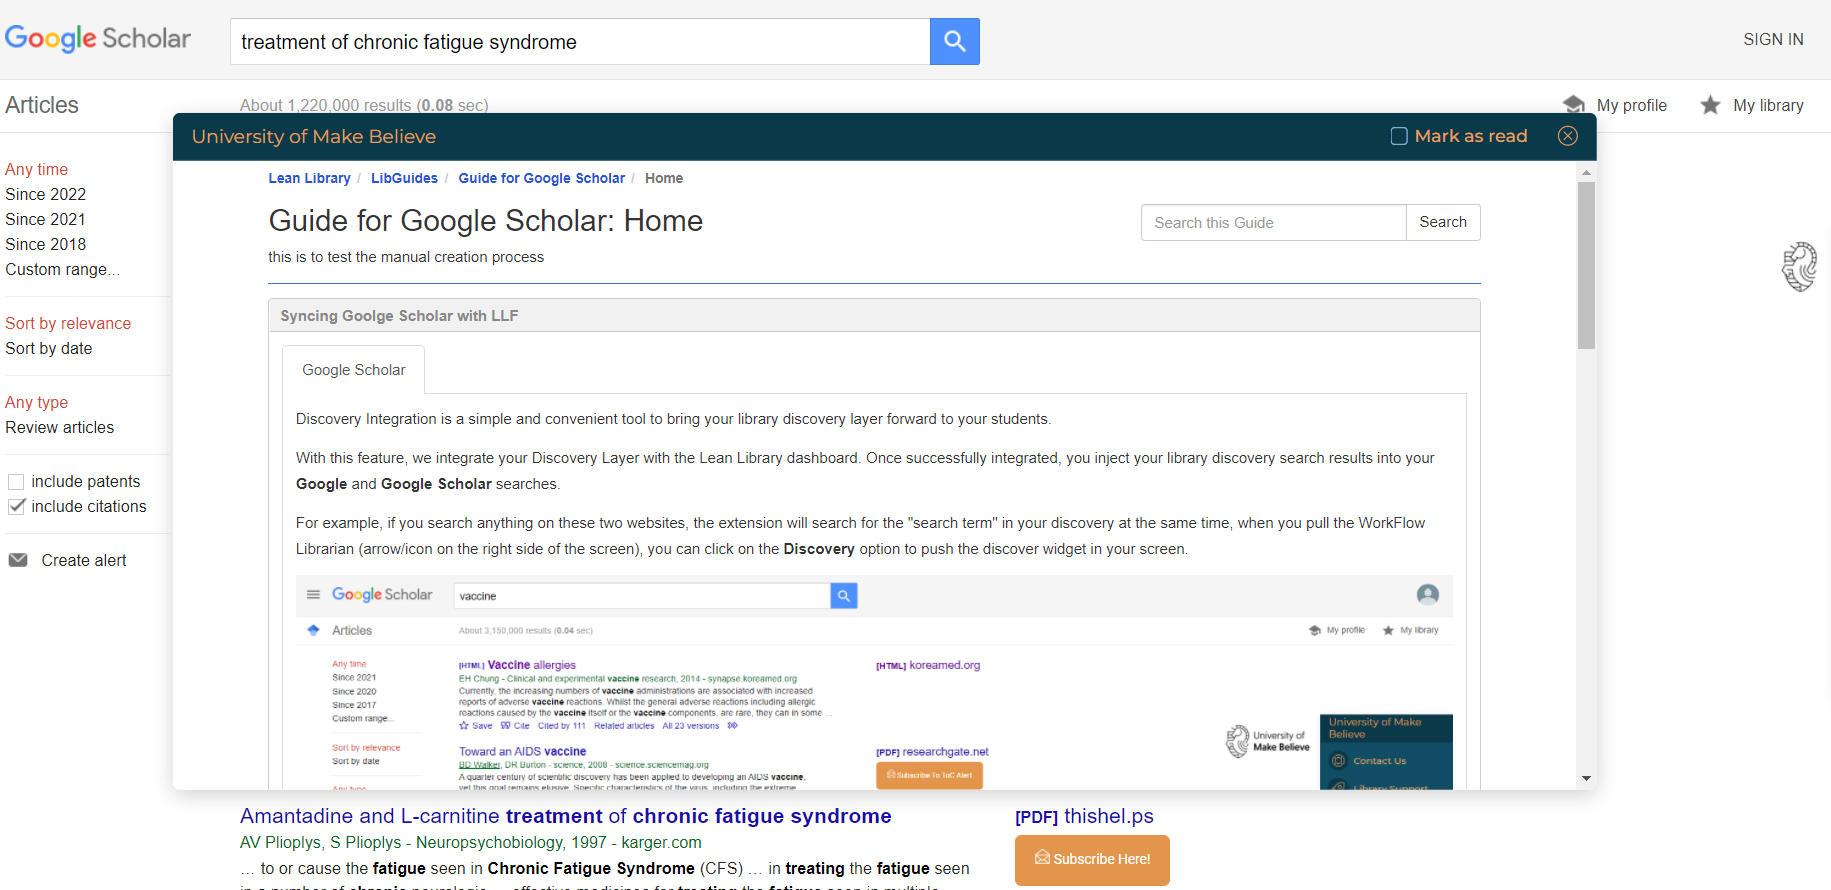 An example of training content for Google Scholar